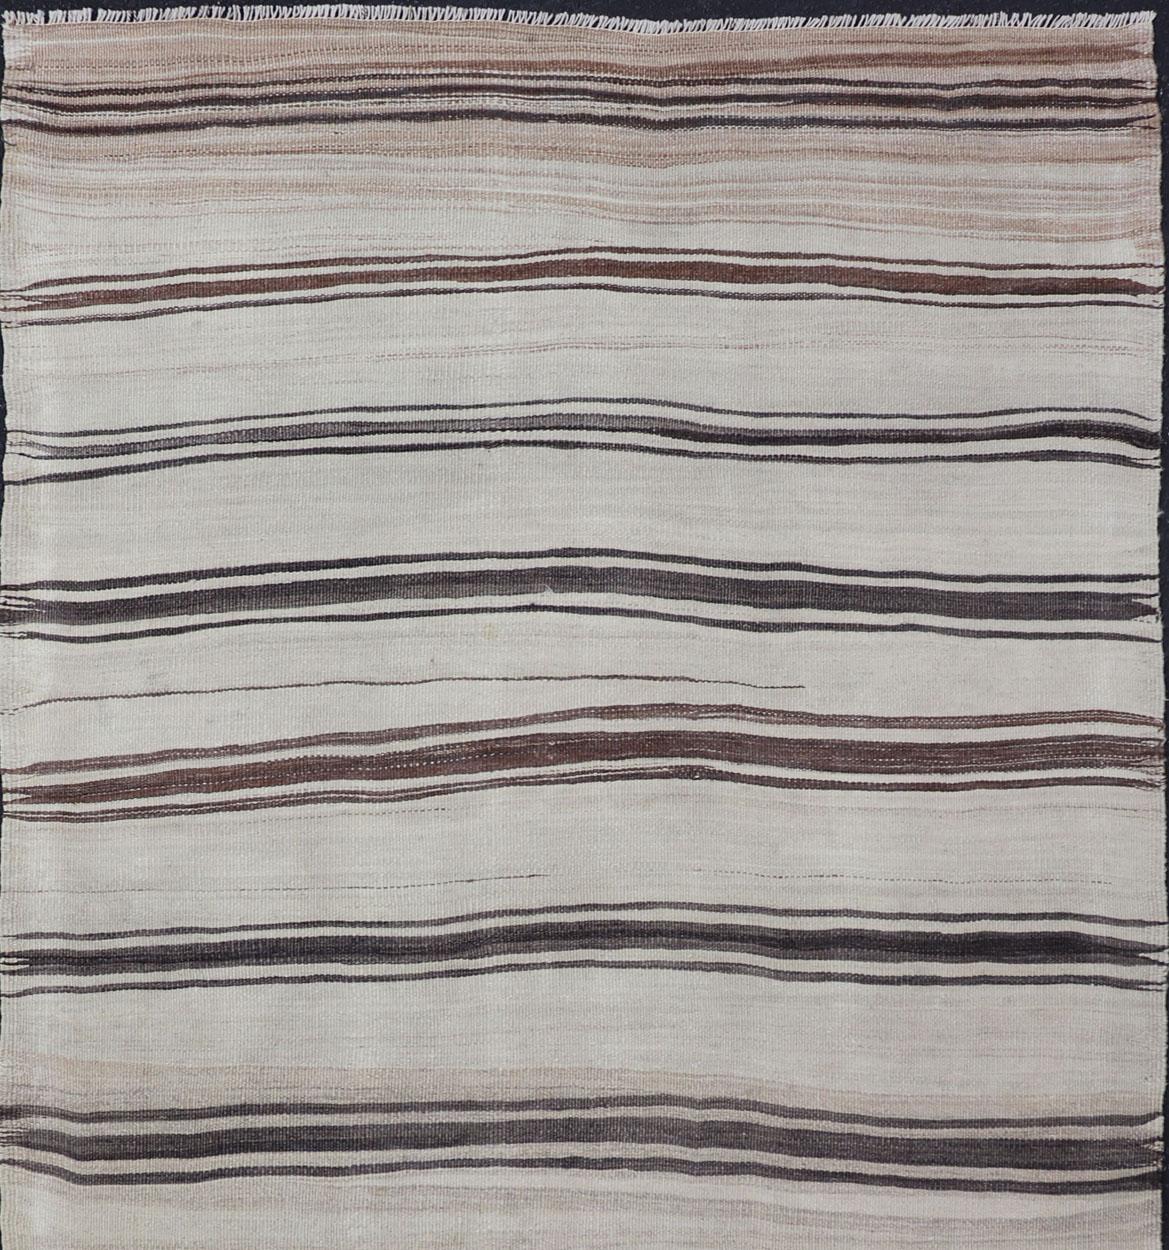 Turkish vintage flat-weave in shades of brown and ivory with stripe design with Minimalist design and stripes. Keivan Woven Arts / rug EN-P13118, country of origin / type: Turkey / Kilim, circa 1950

This vintage striped design Turkish Kilim